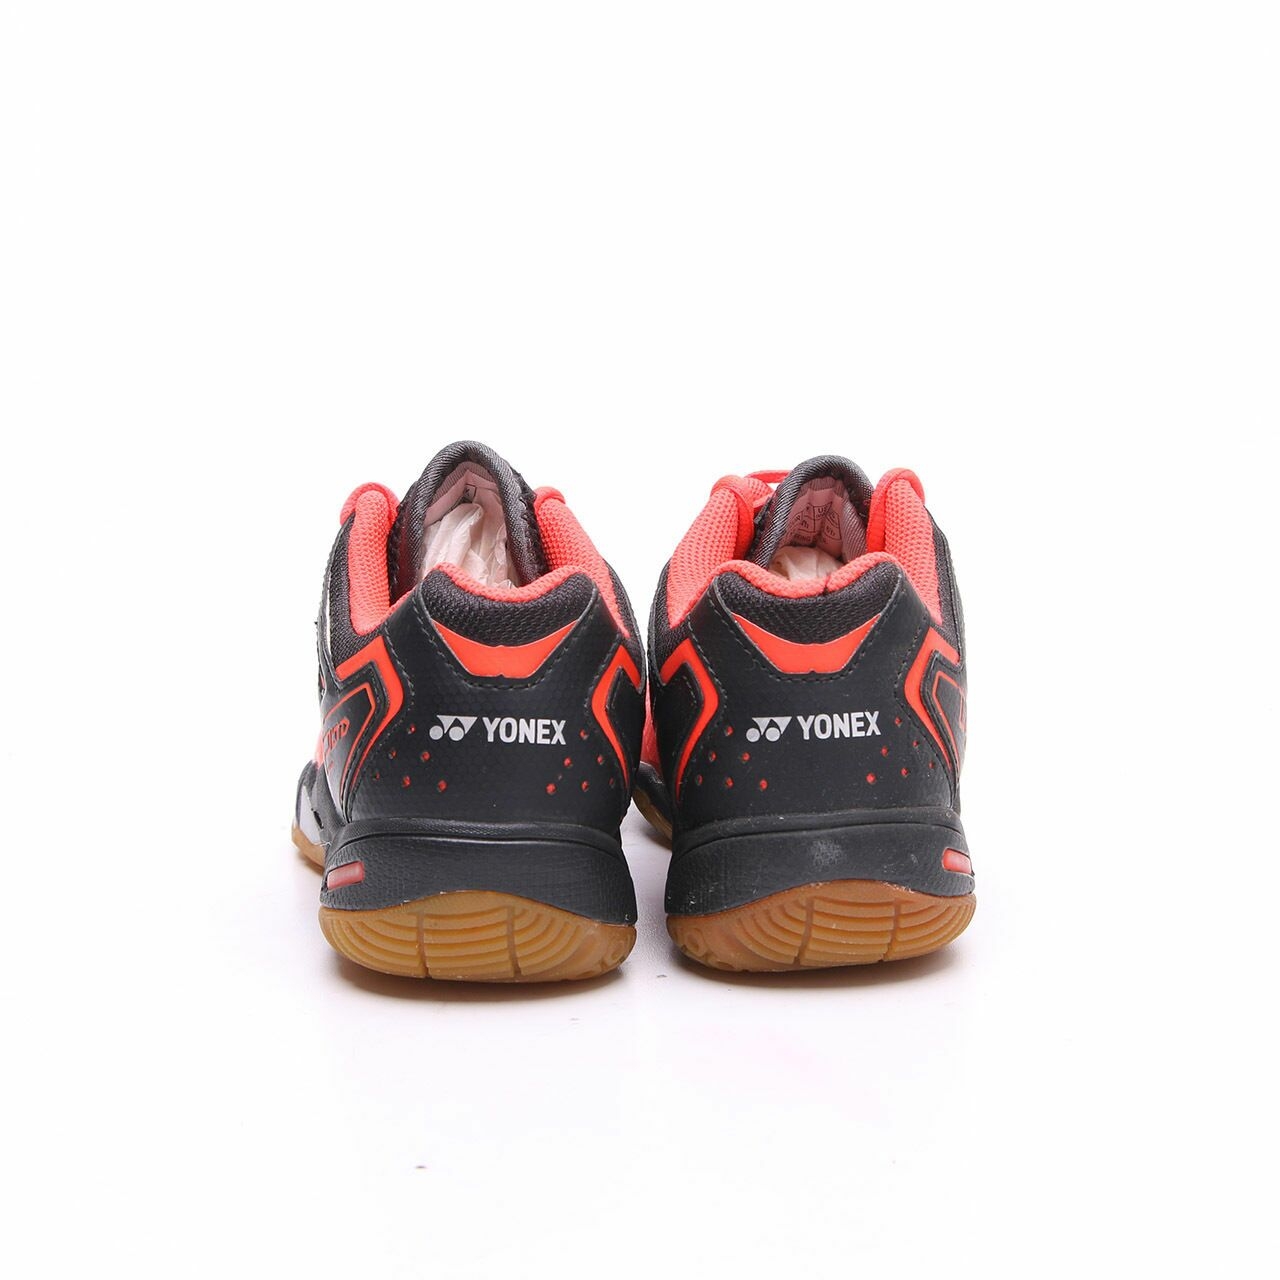 Yonex Bright Red Sneakers